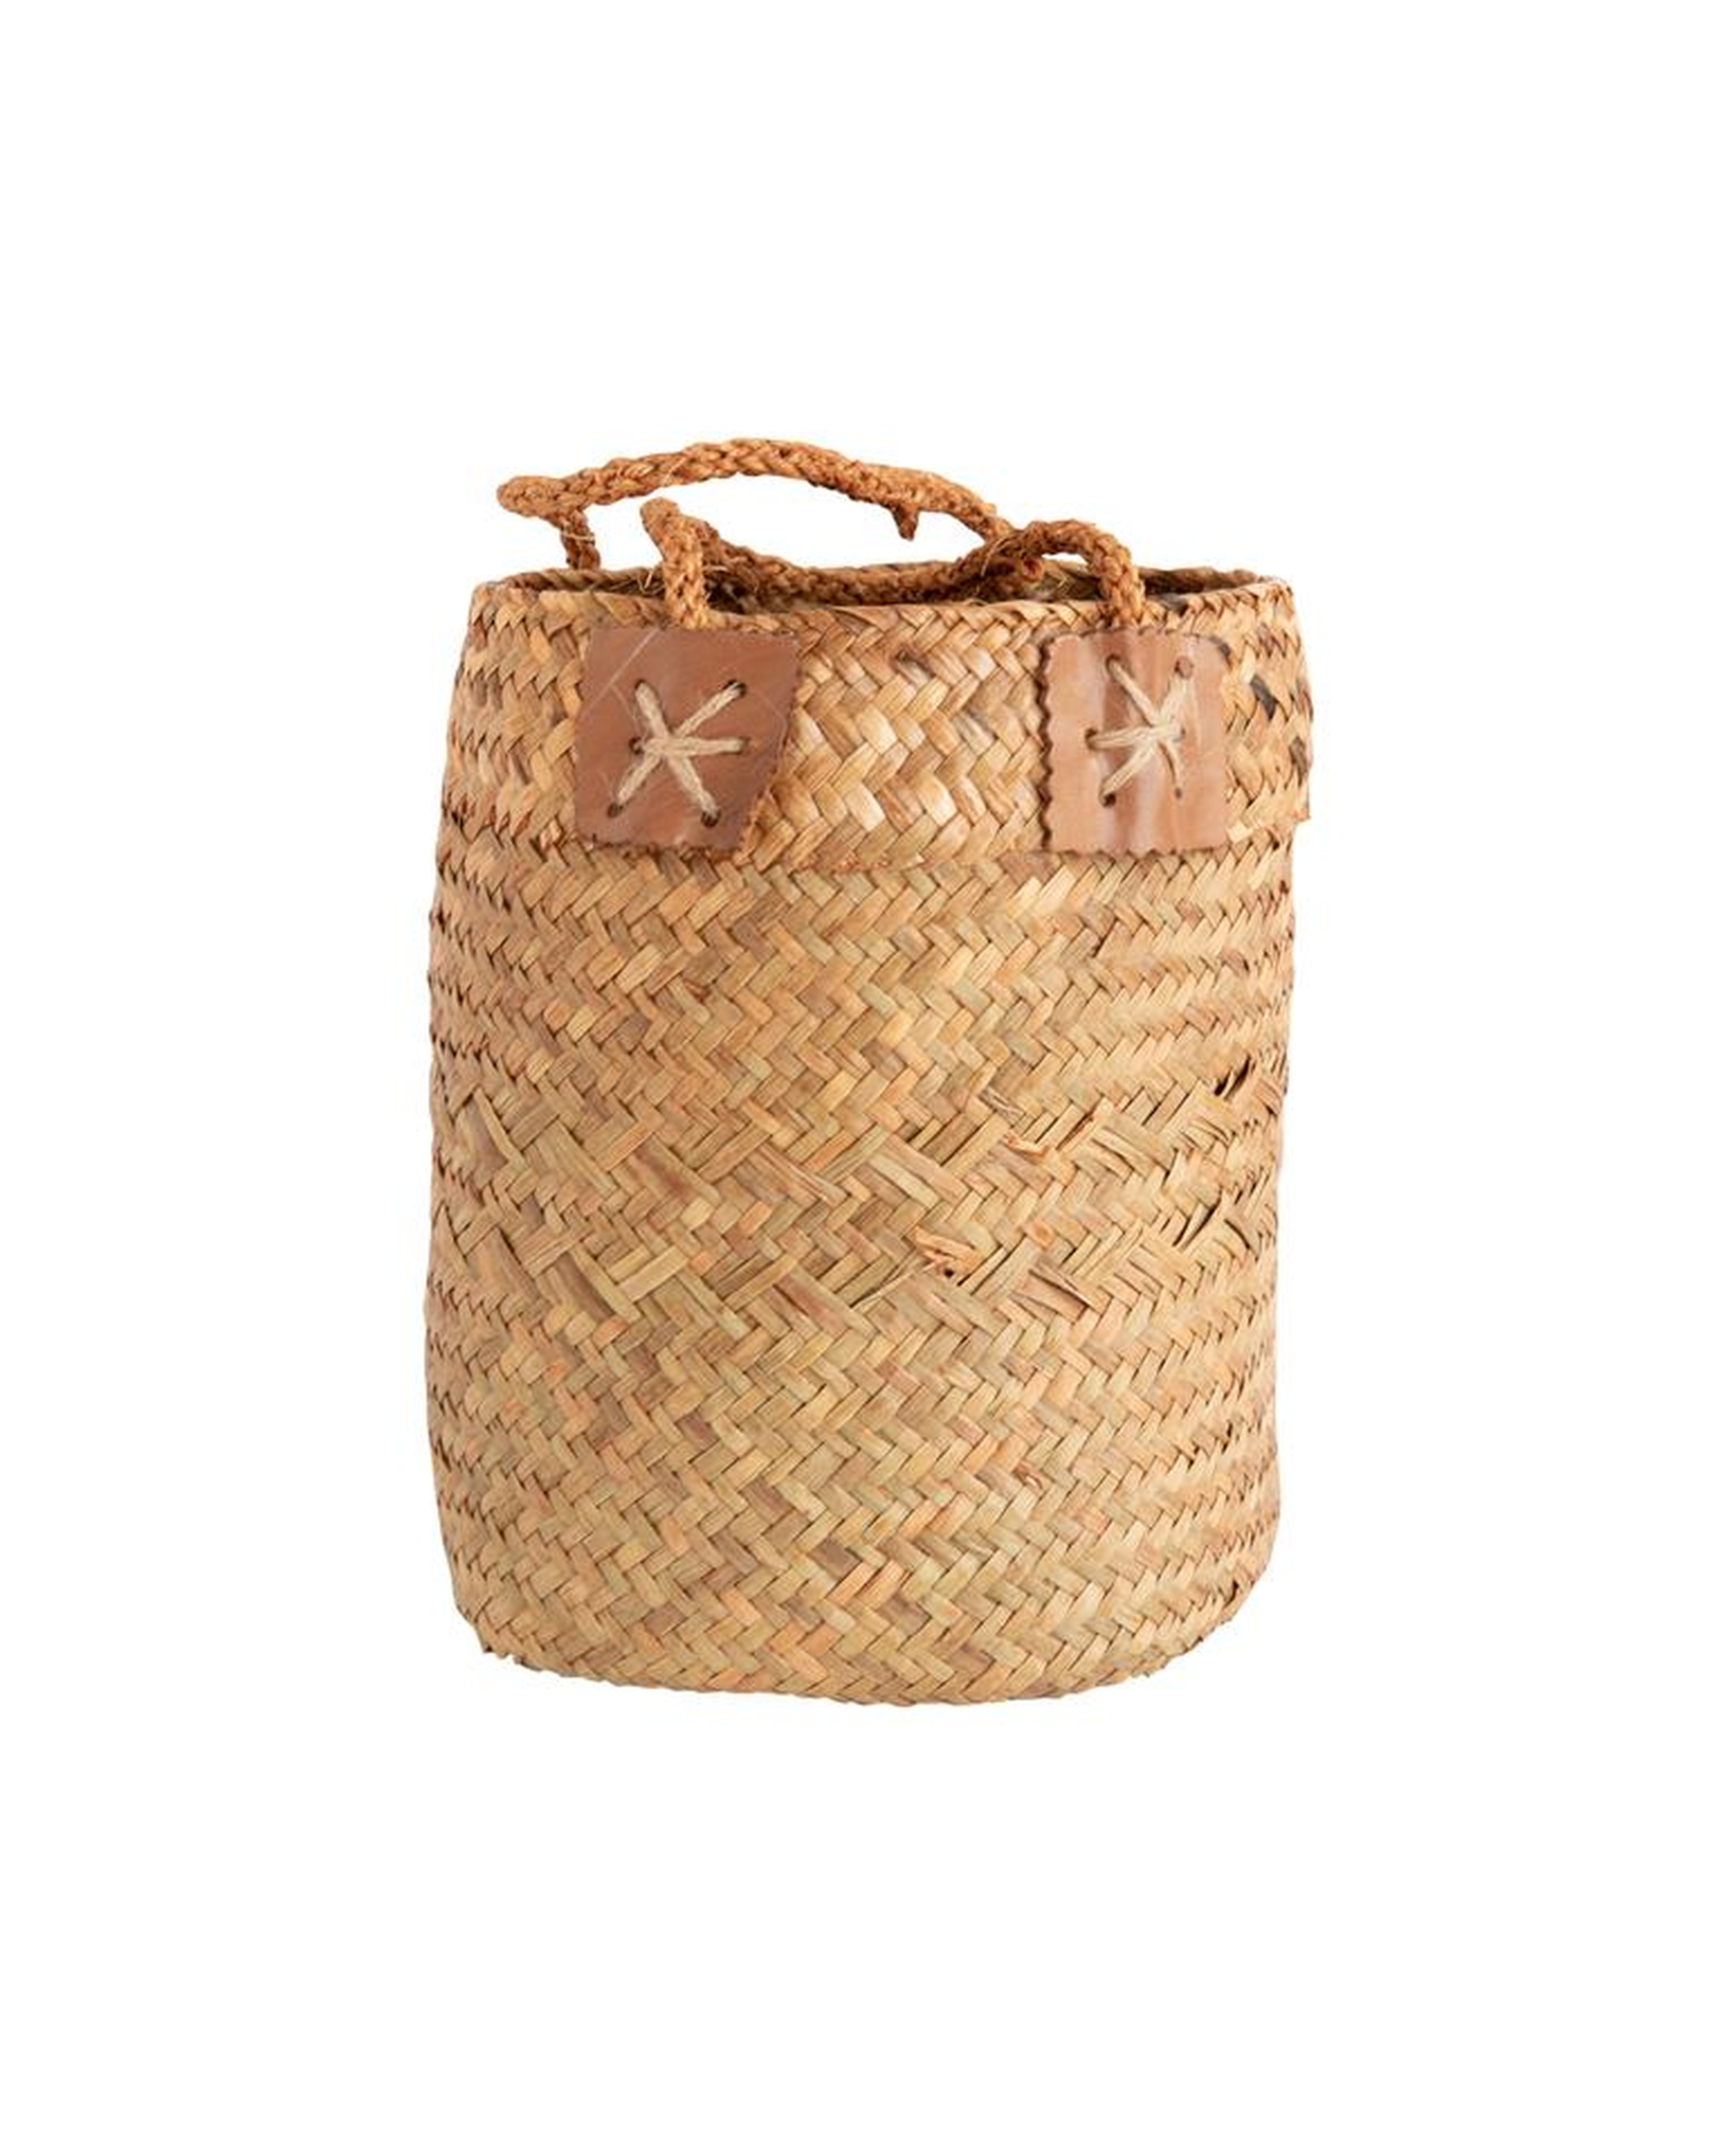 WOVEN SEAGRASS BASKET - SMALL - McGee & Co.